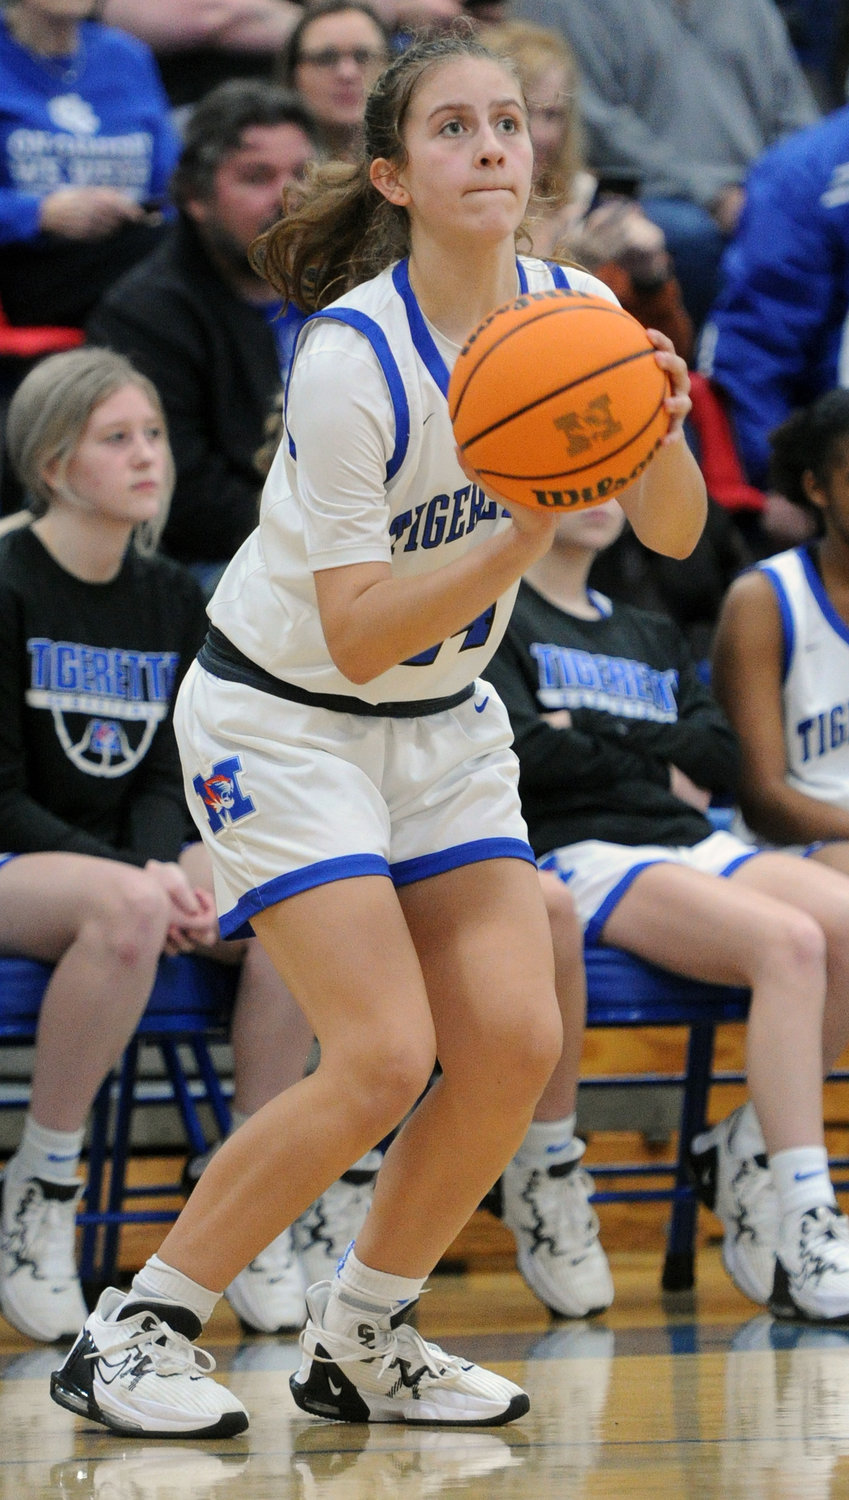 Maggie Steely takes aim at a corner three-pointer.